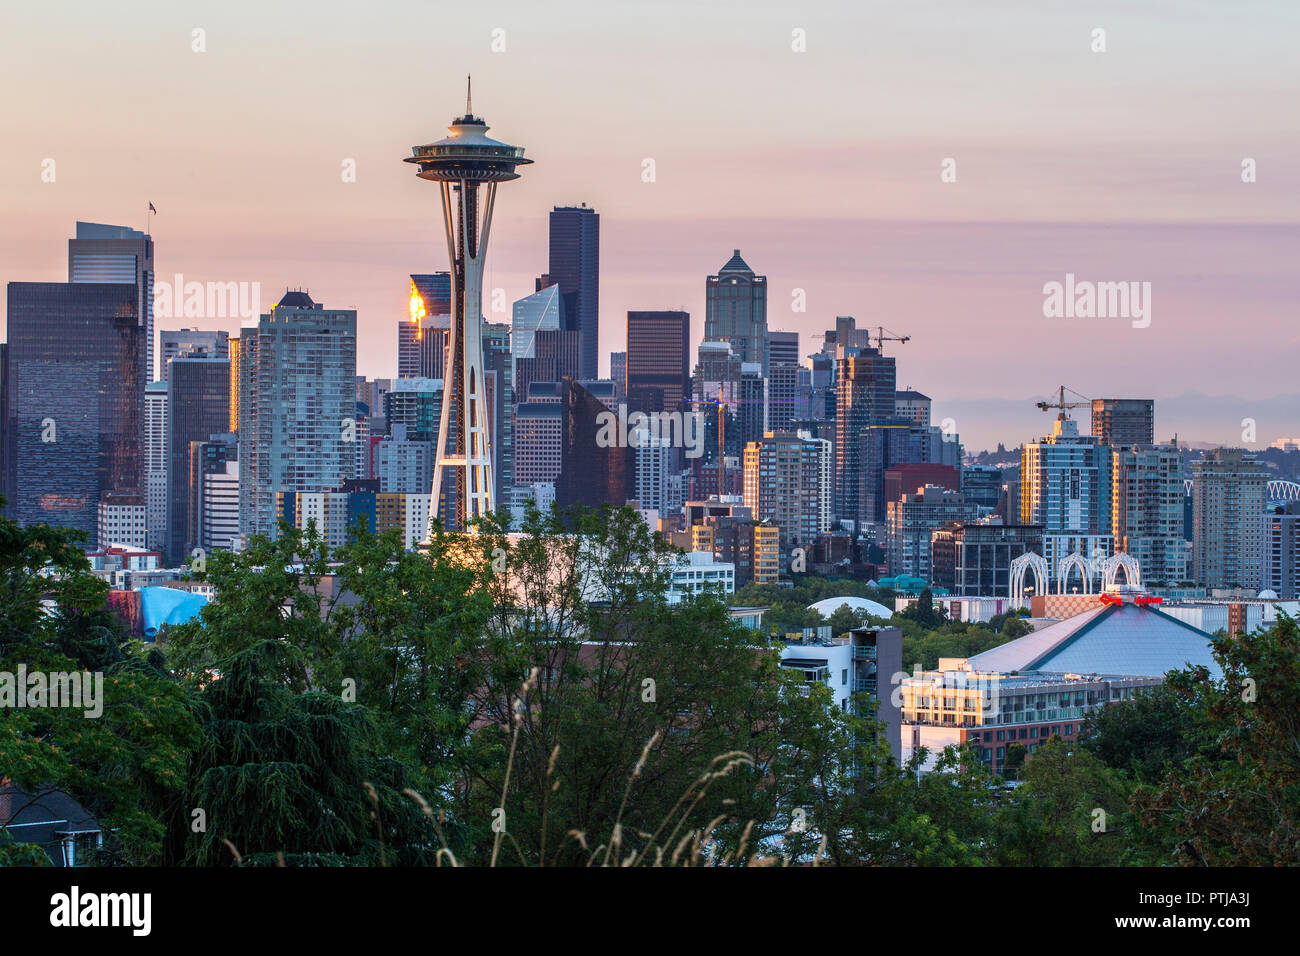 A photo of the Seattle Skyline at dawn Stock Photo